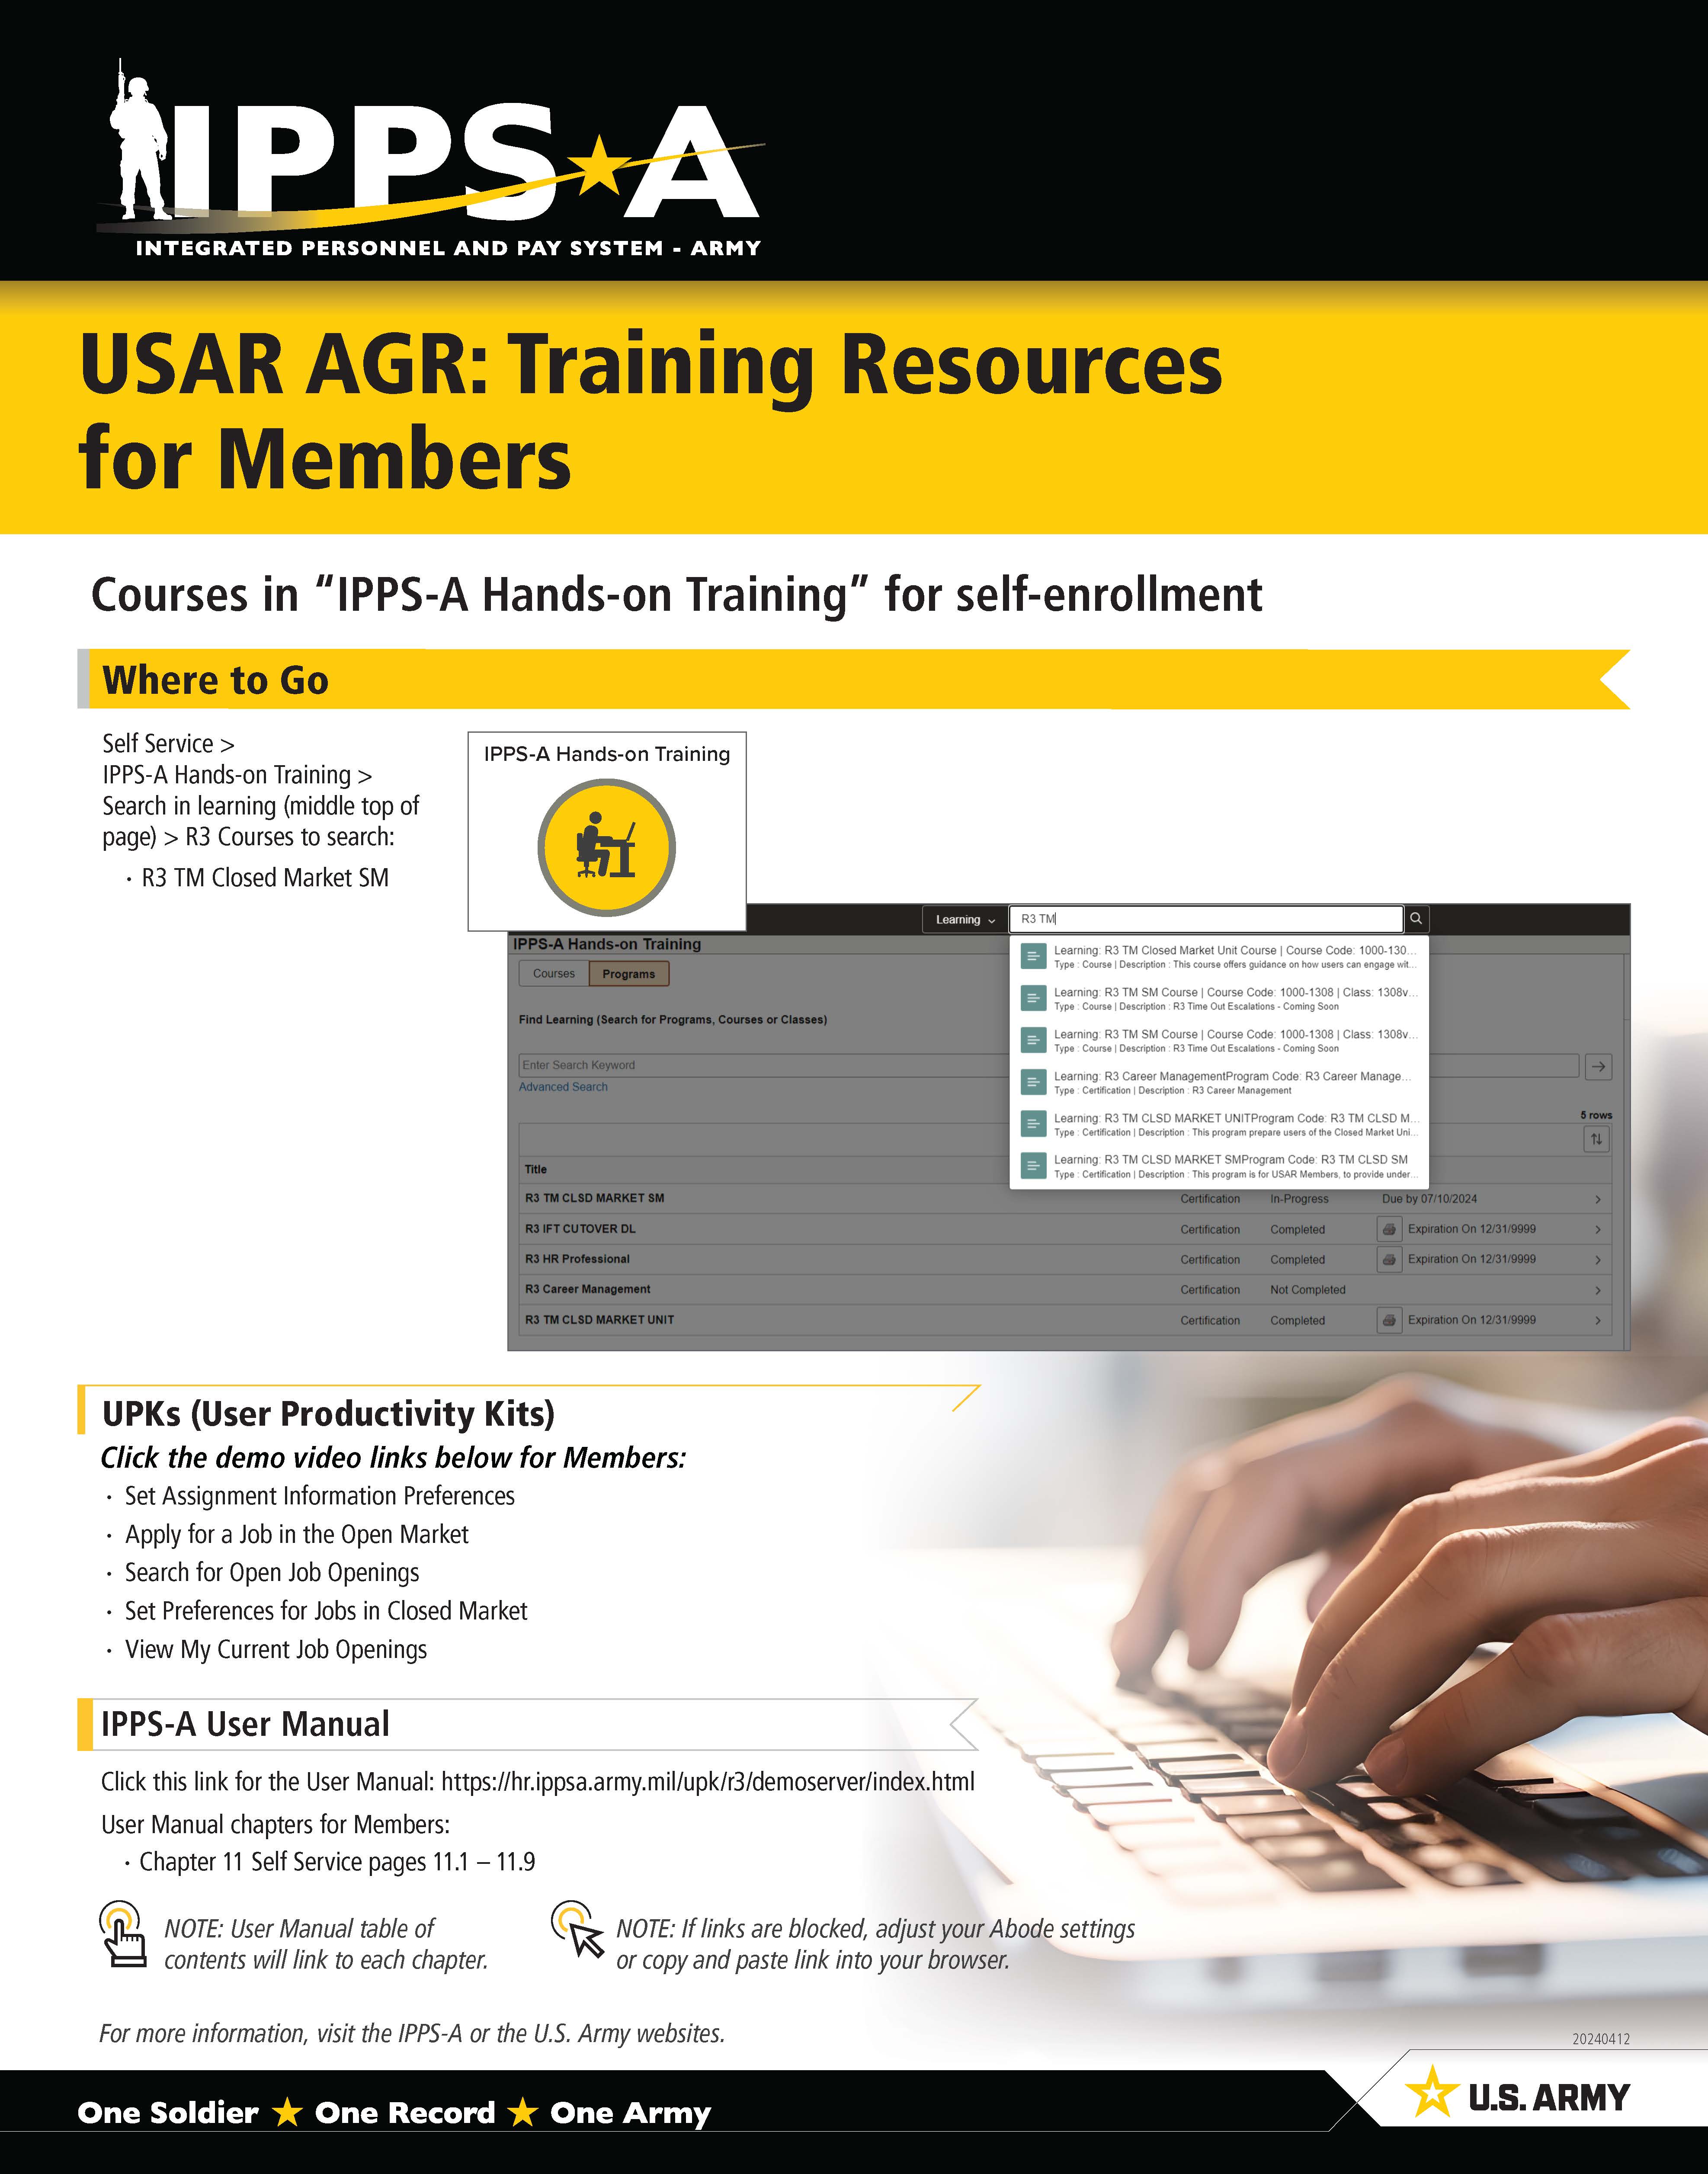 Link to USAR AGR: Training Resources for Members